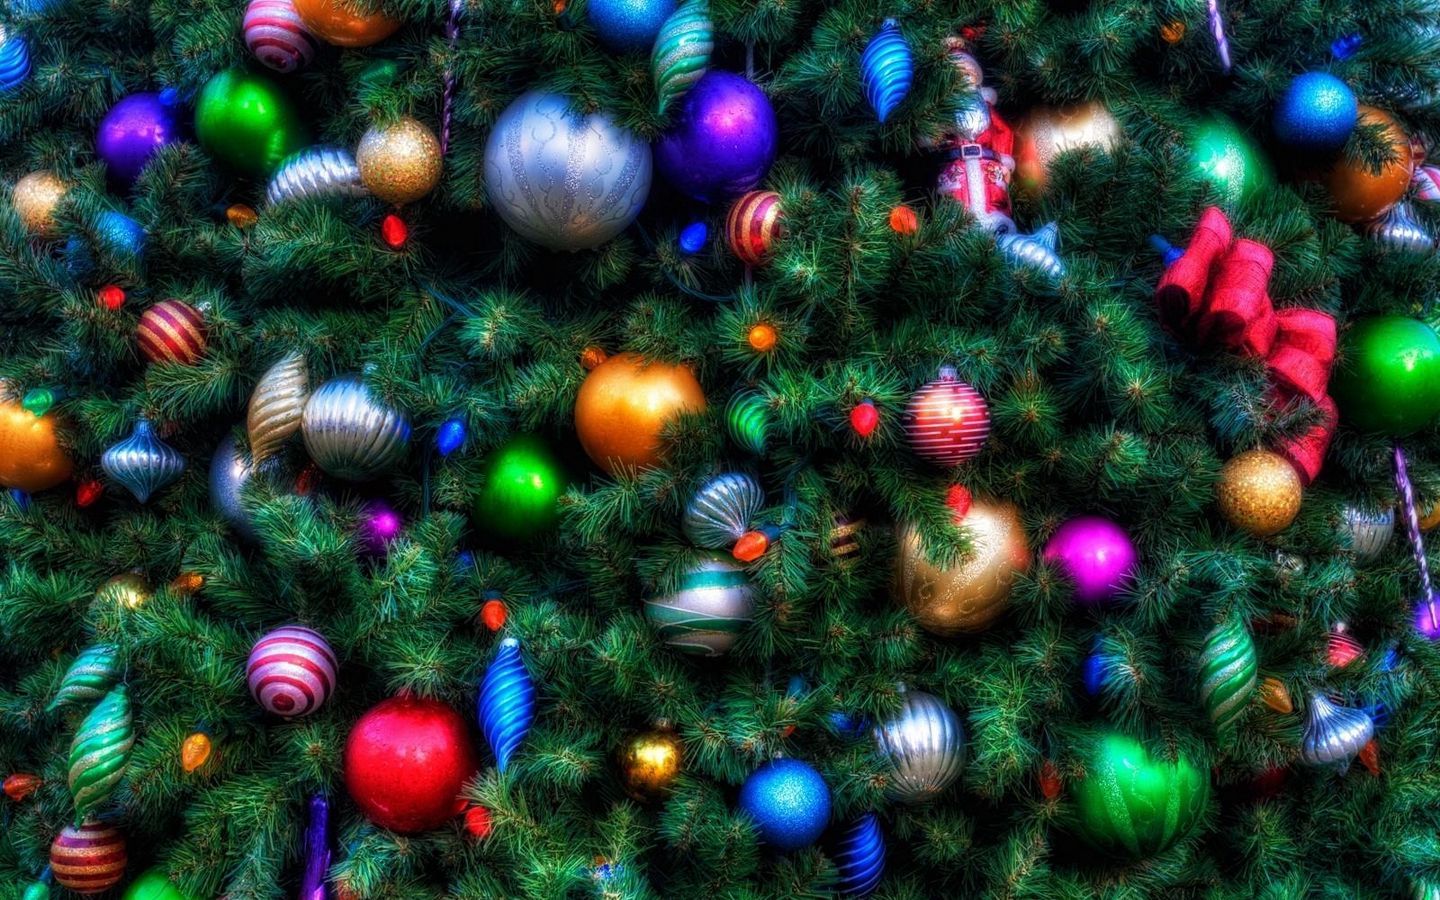 Download wallpaper 1440x900 christmas tree, ornaments, holiday, garland widescreen 16:10 HD background